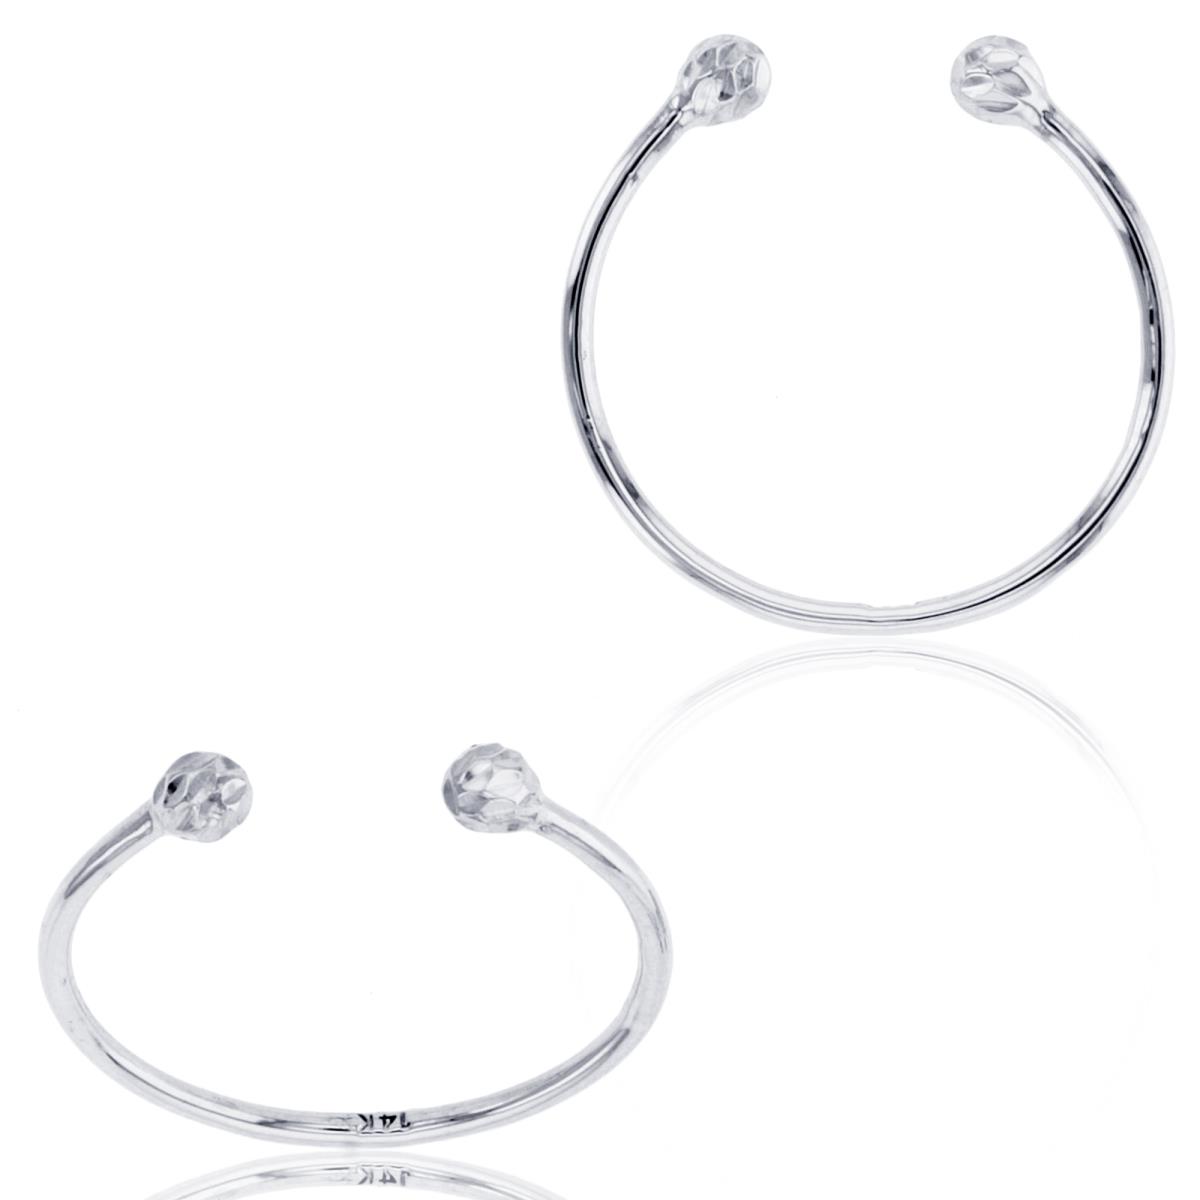 14K White Gold 3mm DC Beads on Adjustable Wire Ring